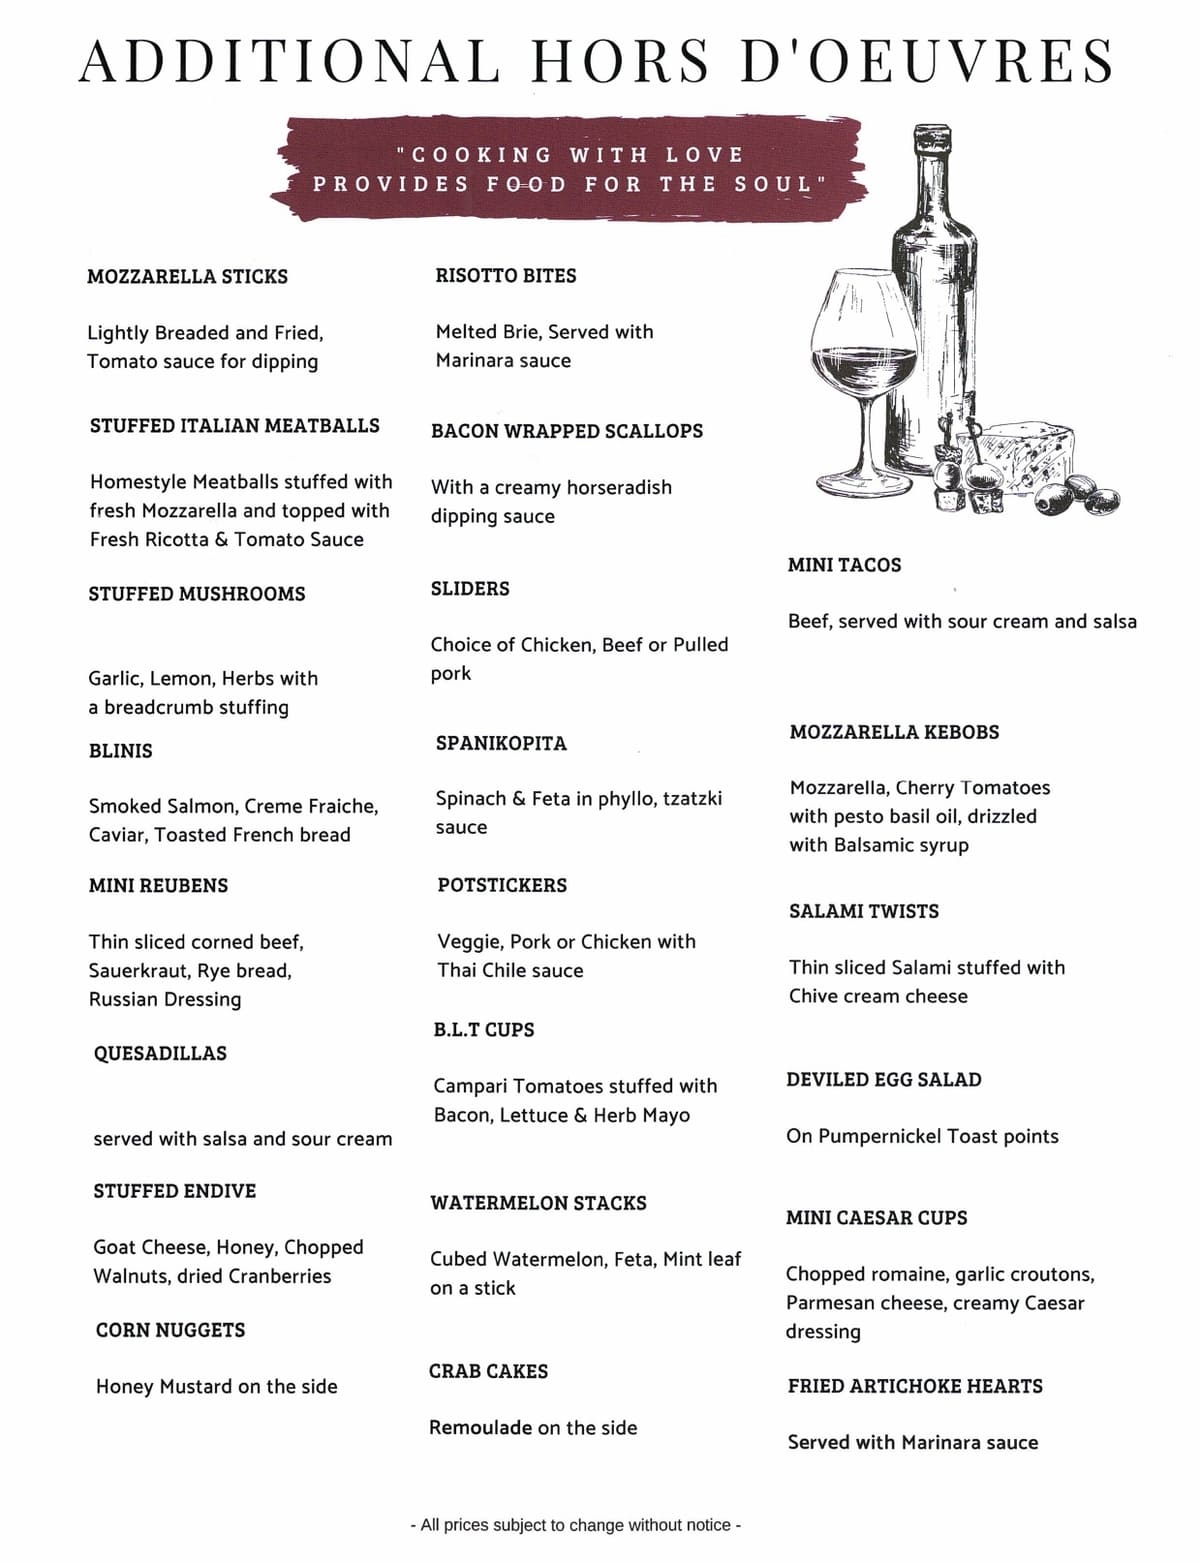 Catering Menu - Additional Hors D'oeuvres